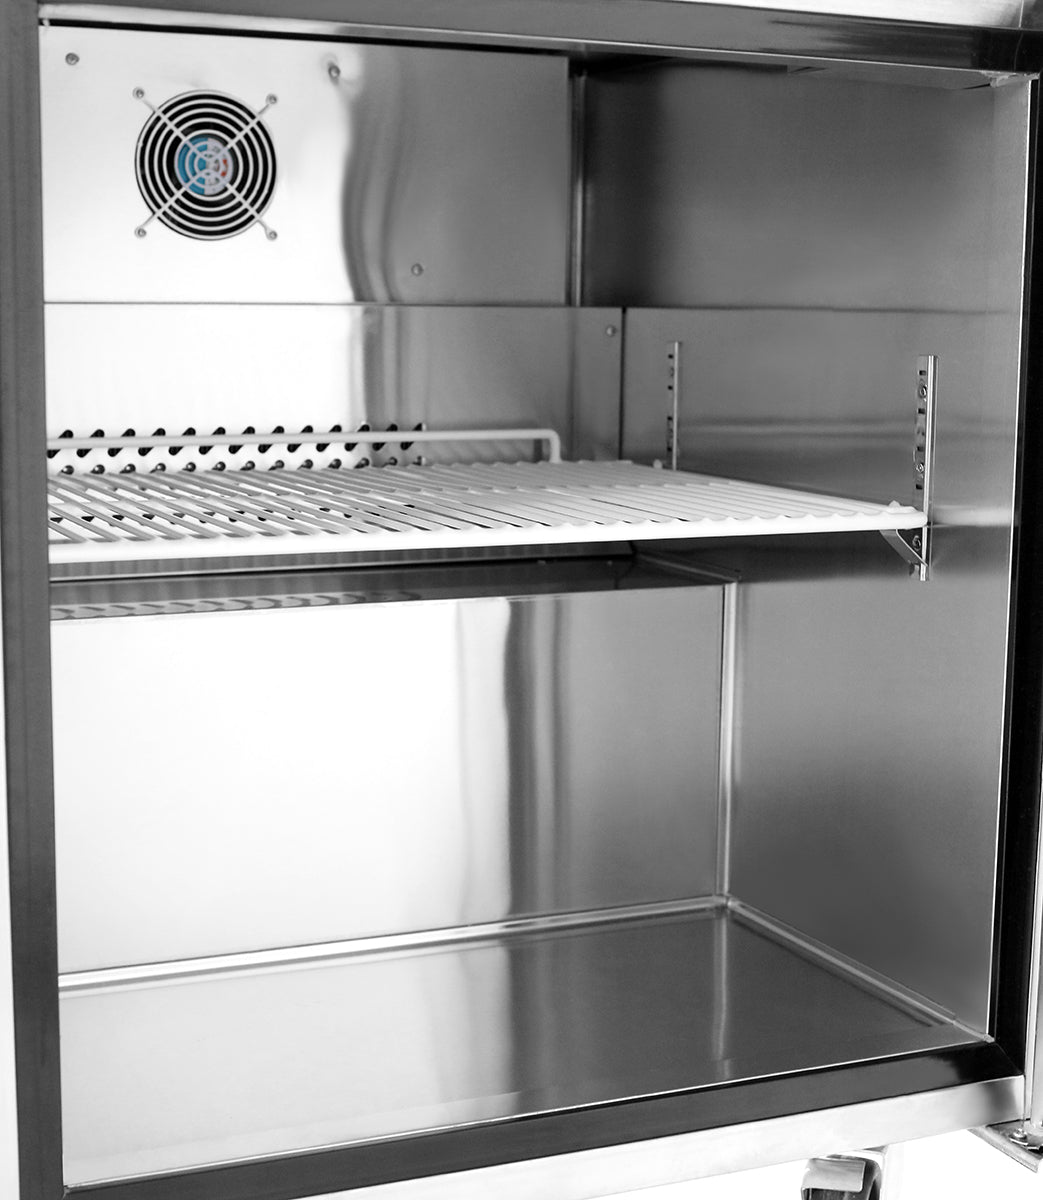 Atosa MGF36FGR 36" Undercounter-Freezer Dimensions: 36-3/8 W * 30 D * 34-1/8 H